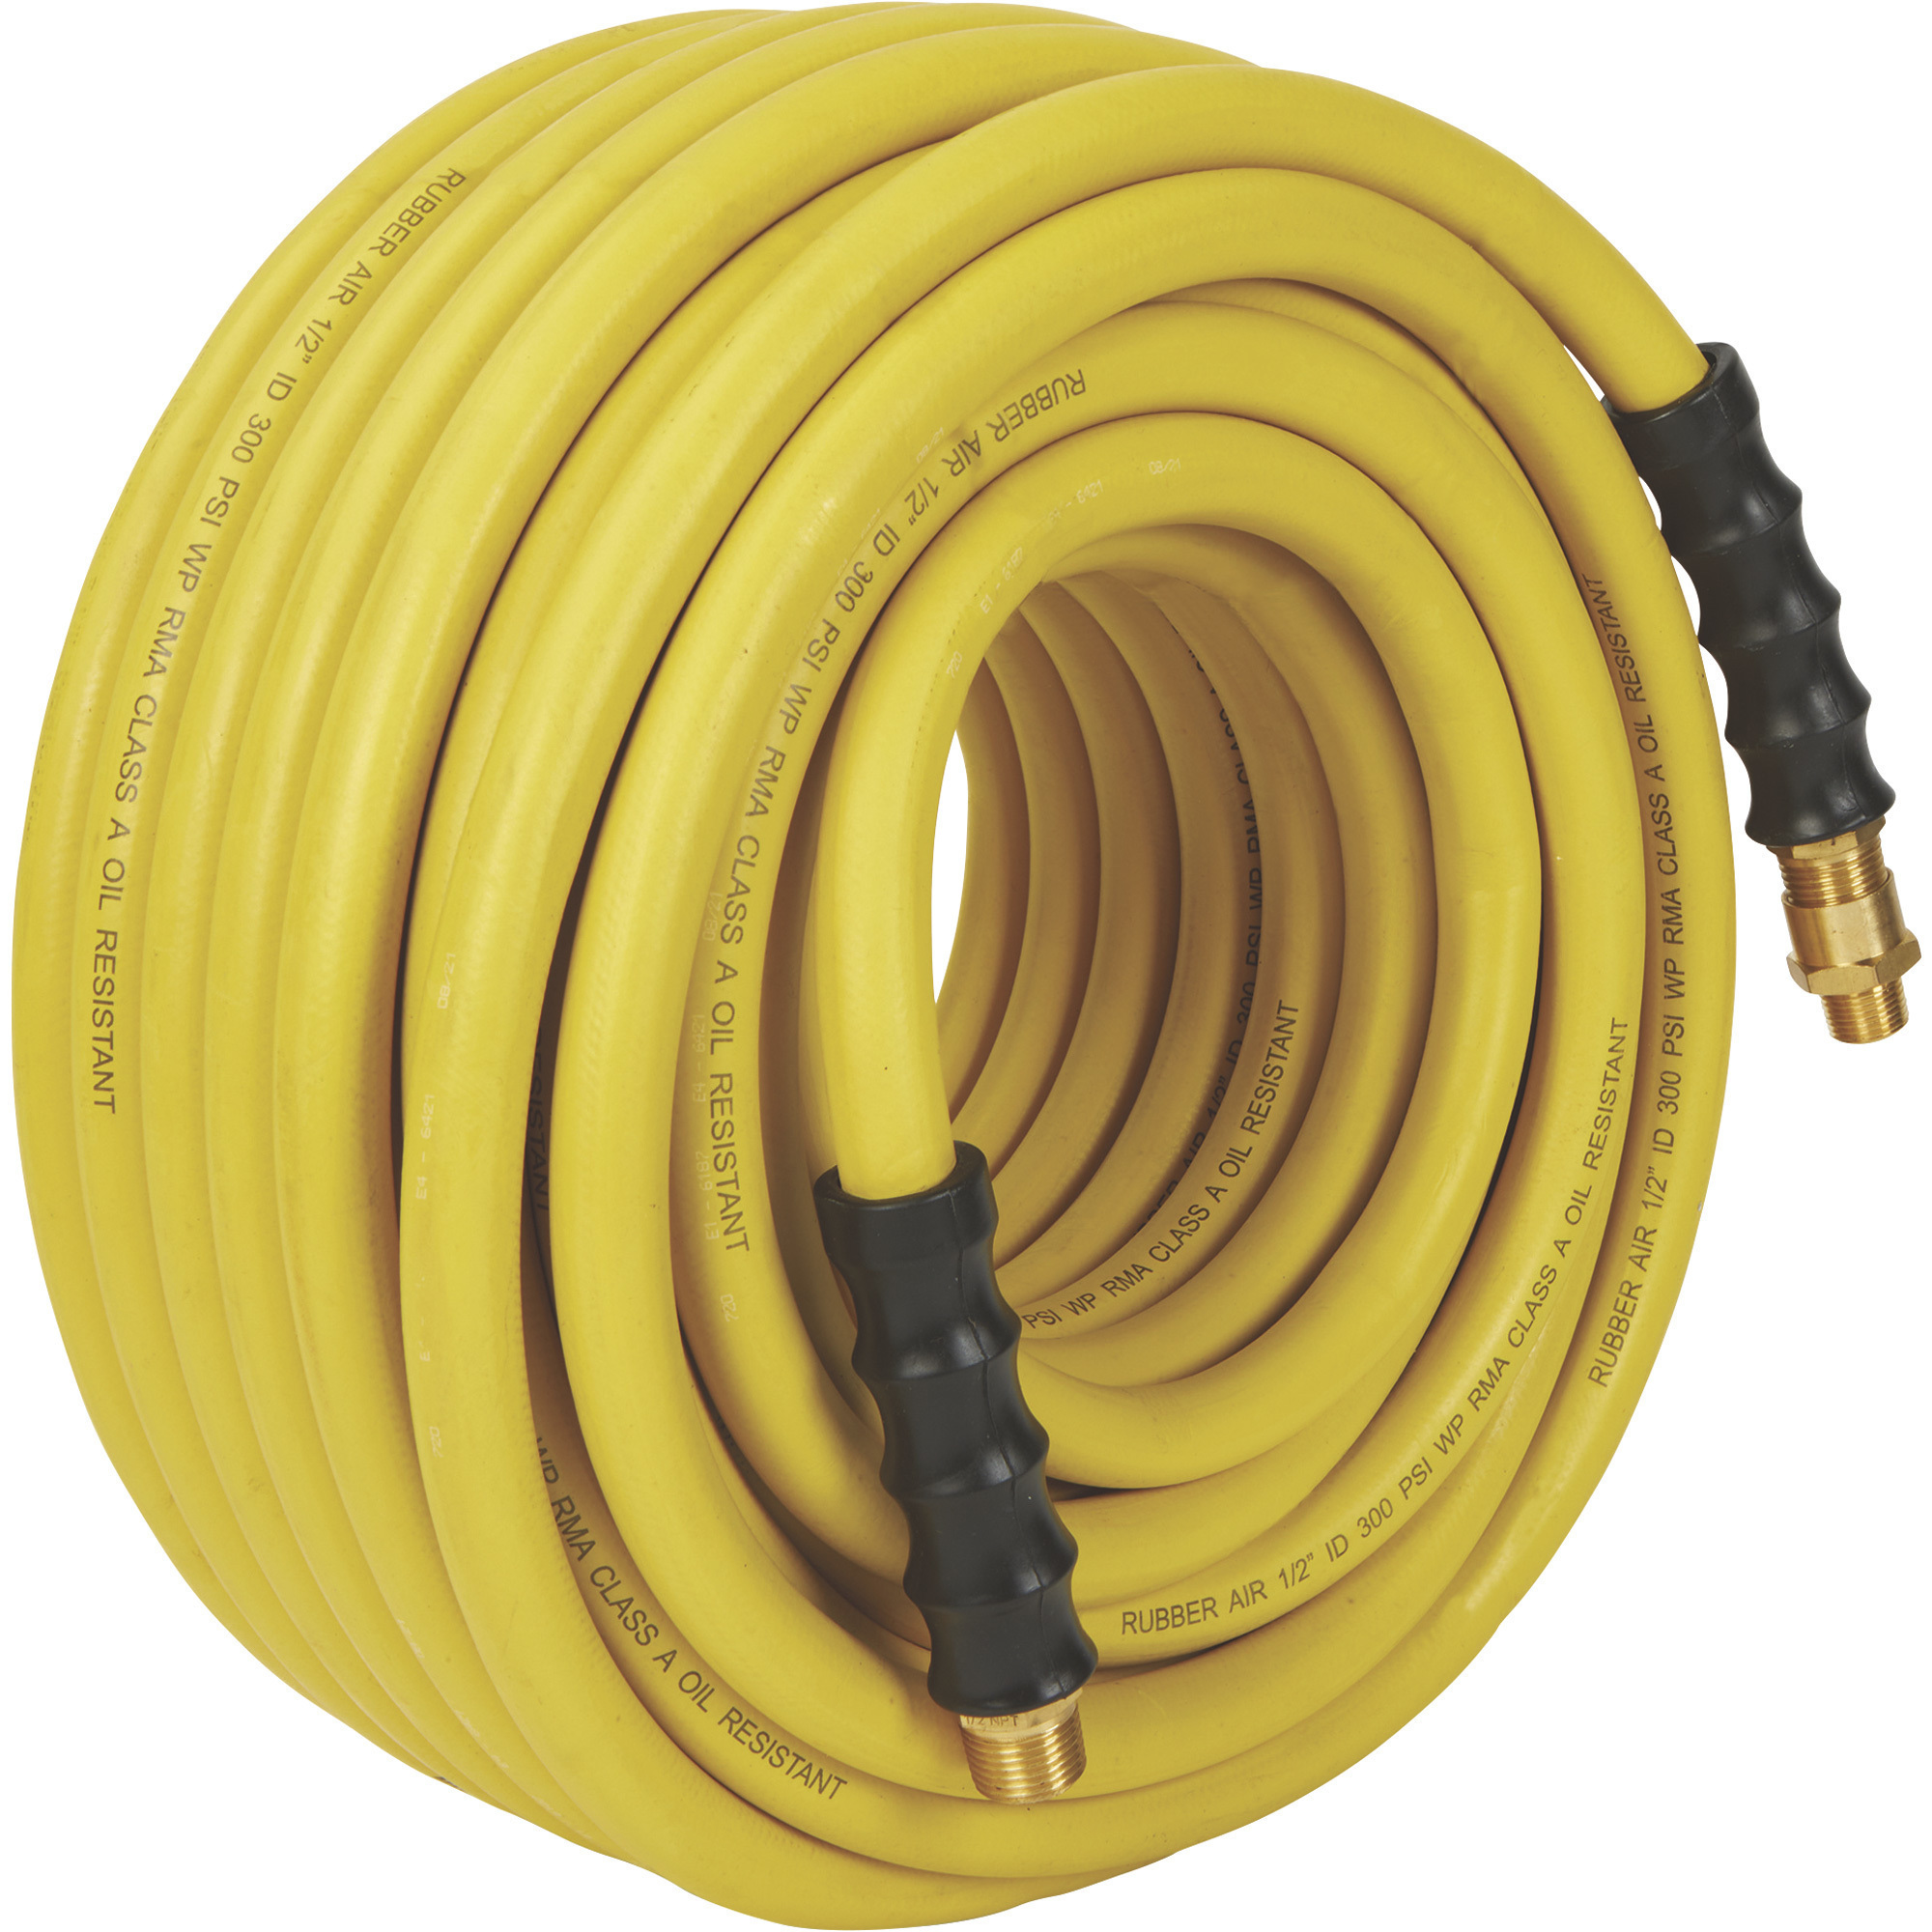 Klutch Oil-Resistant Rubber Air Hose, 1/2Inch x 50ft., with 1/2Inch-3/8Inch Reducer, 300 PSI, Model OS1250-NT